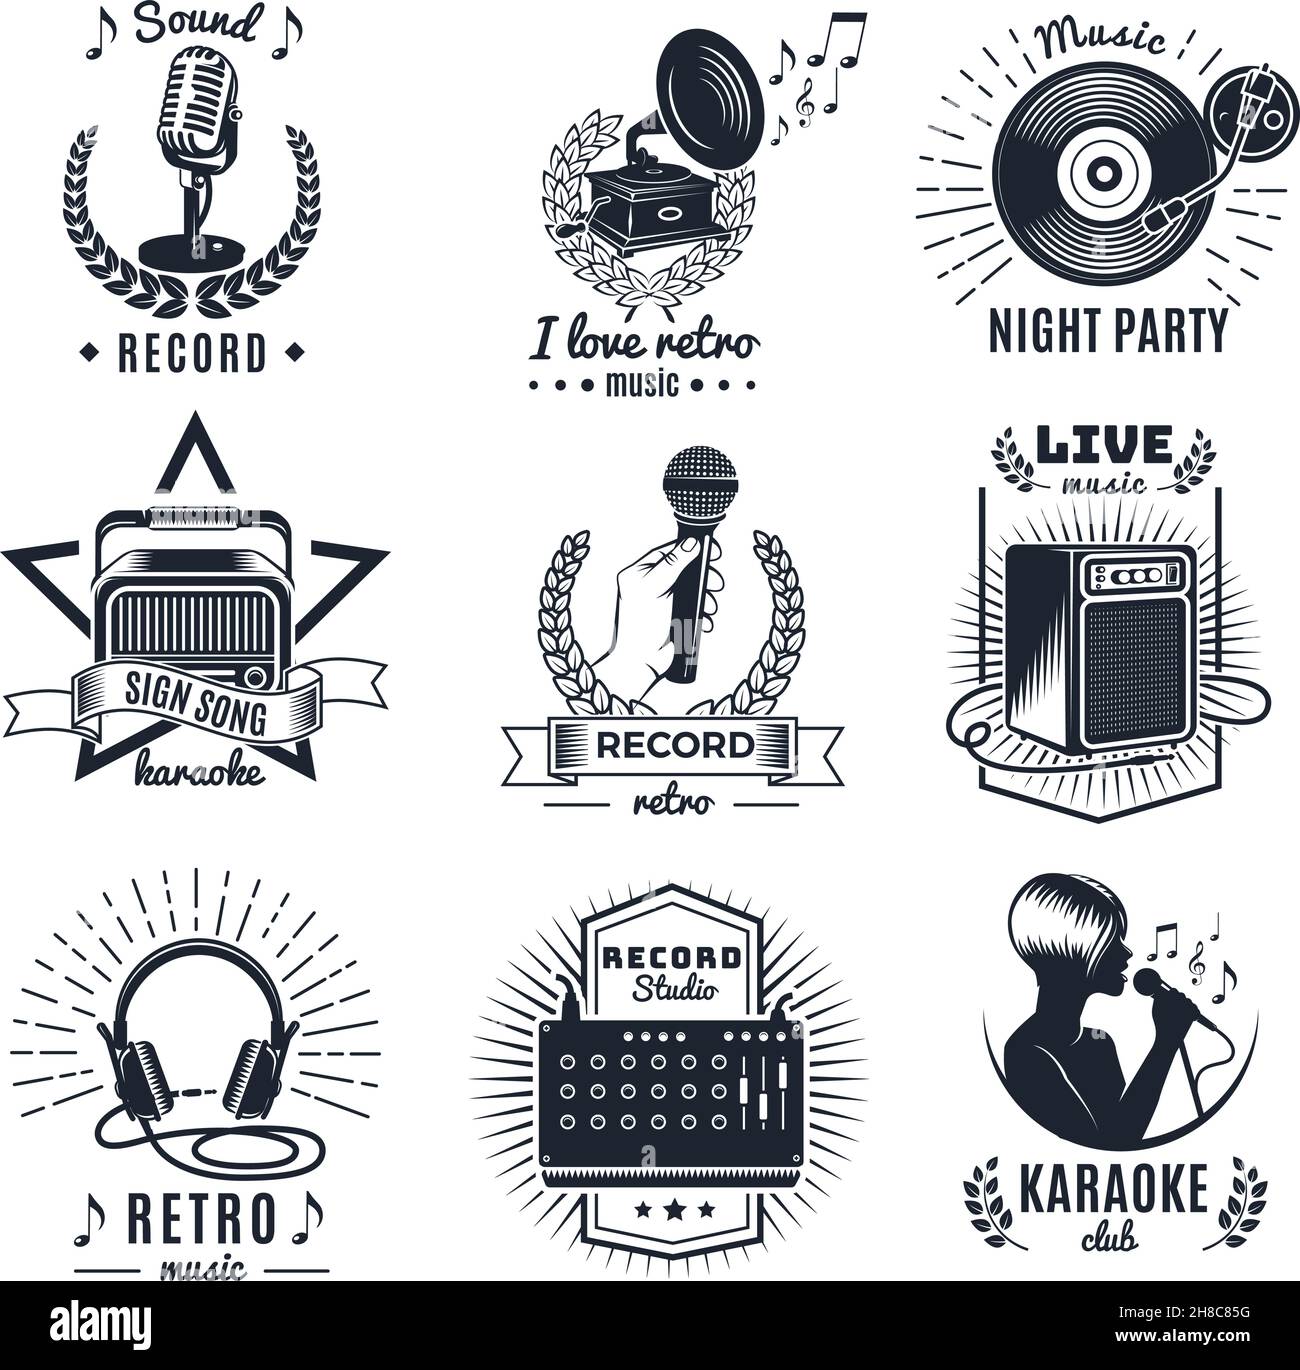 Karaoke elements monochrome vintage emblems of clubs and studio record with letterings music equipment isolated vector illustration Stock Vector